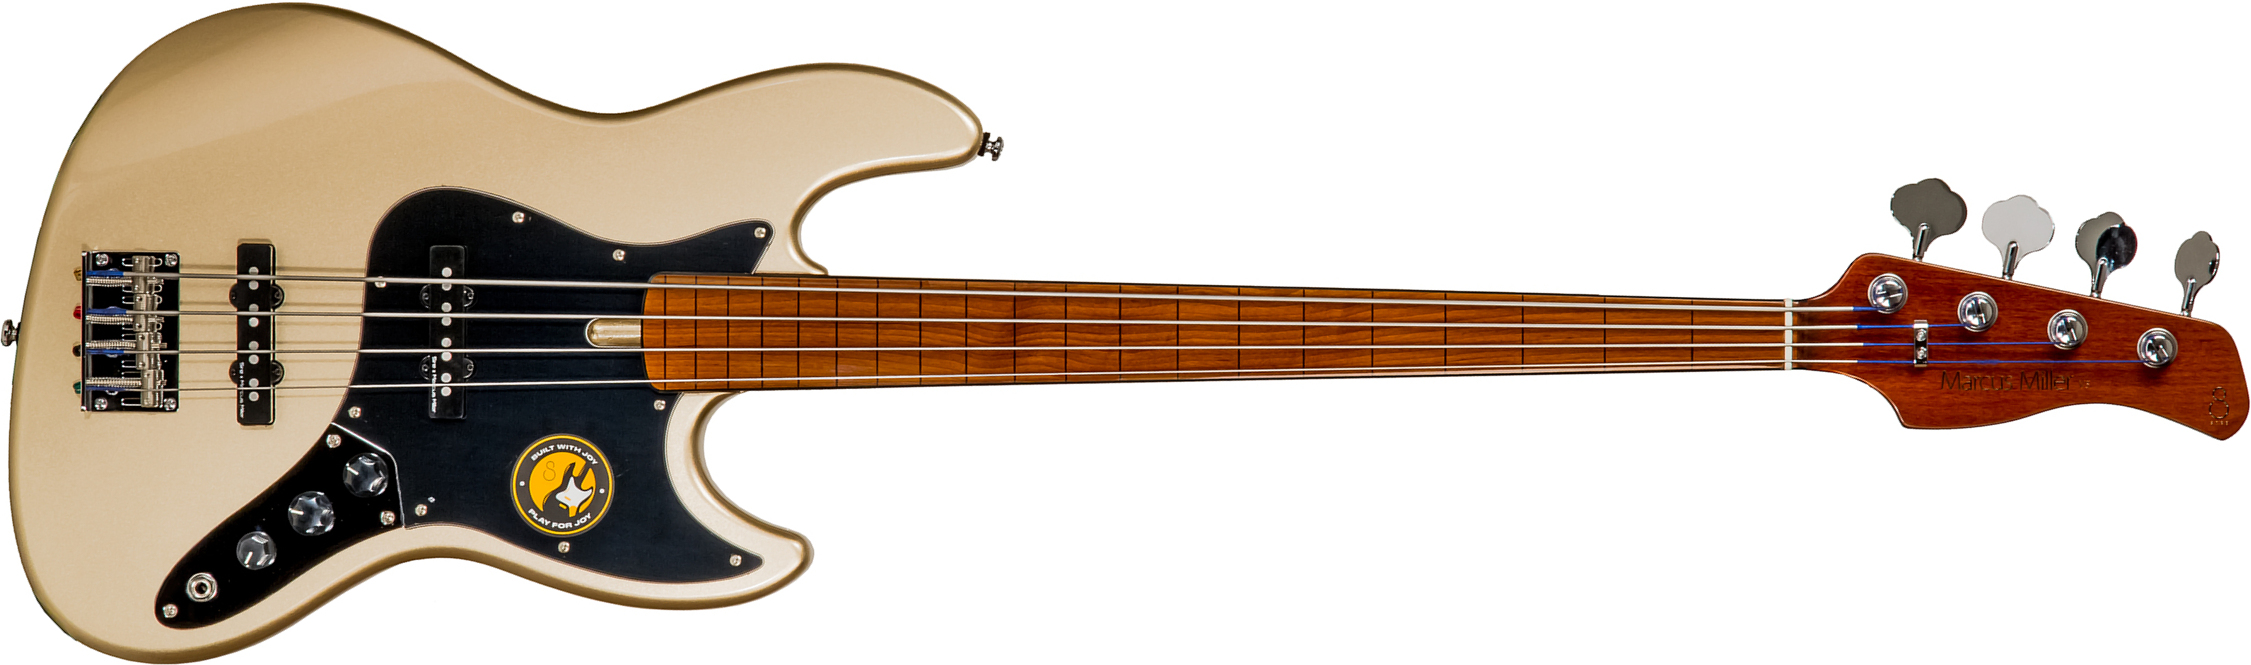 Marcus Miller V5 Alder 4st Fretless Mn - Champagne Gold Metallic - Solid body electric bass - Main picture